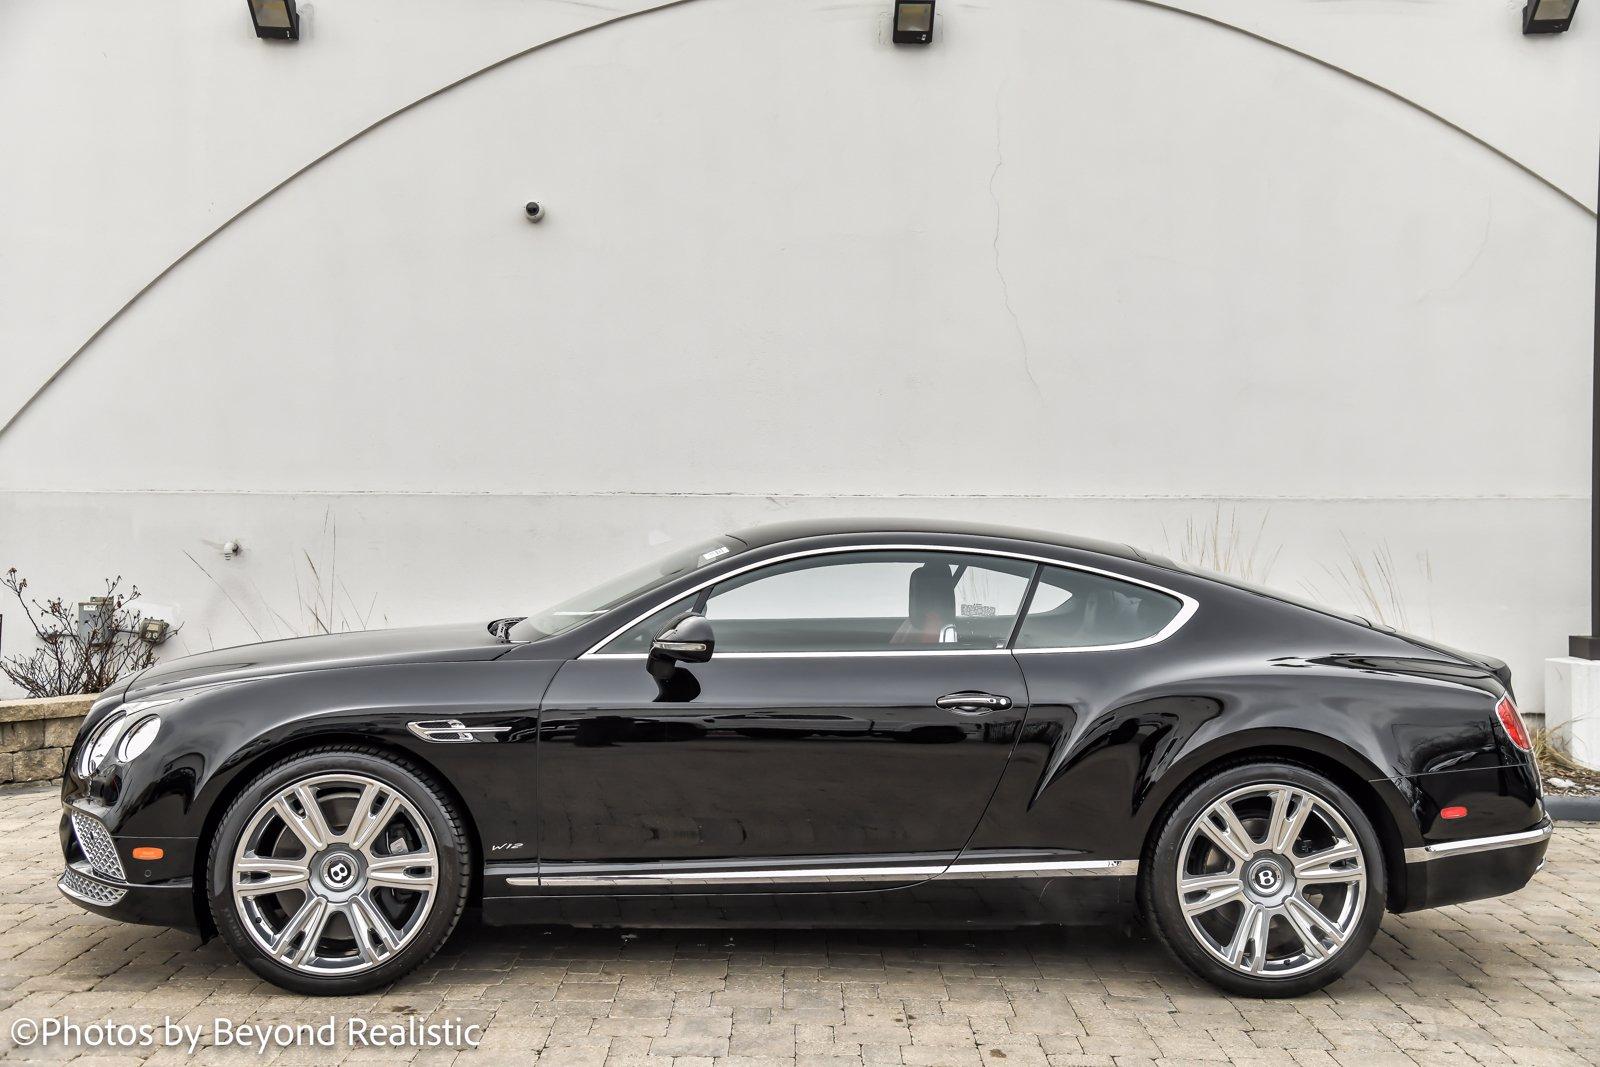 Used 2017 Bentley Continental GT | Downers Grove, IL